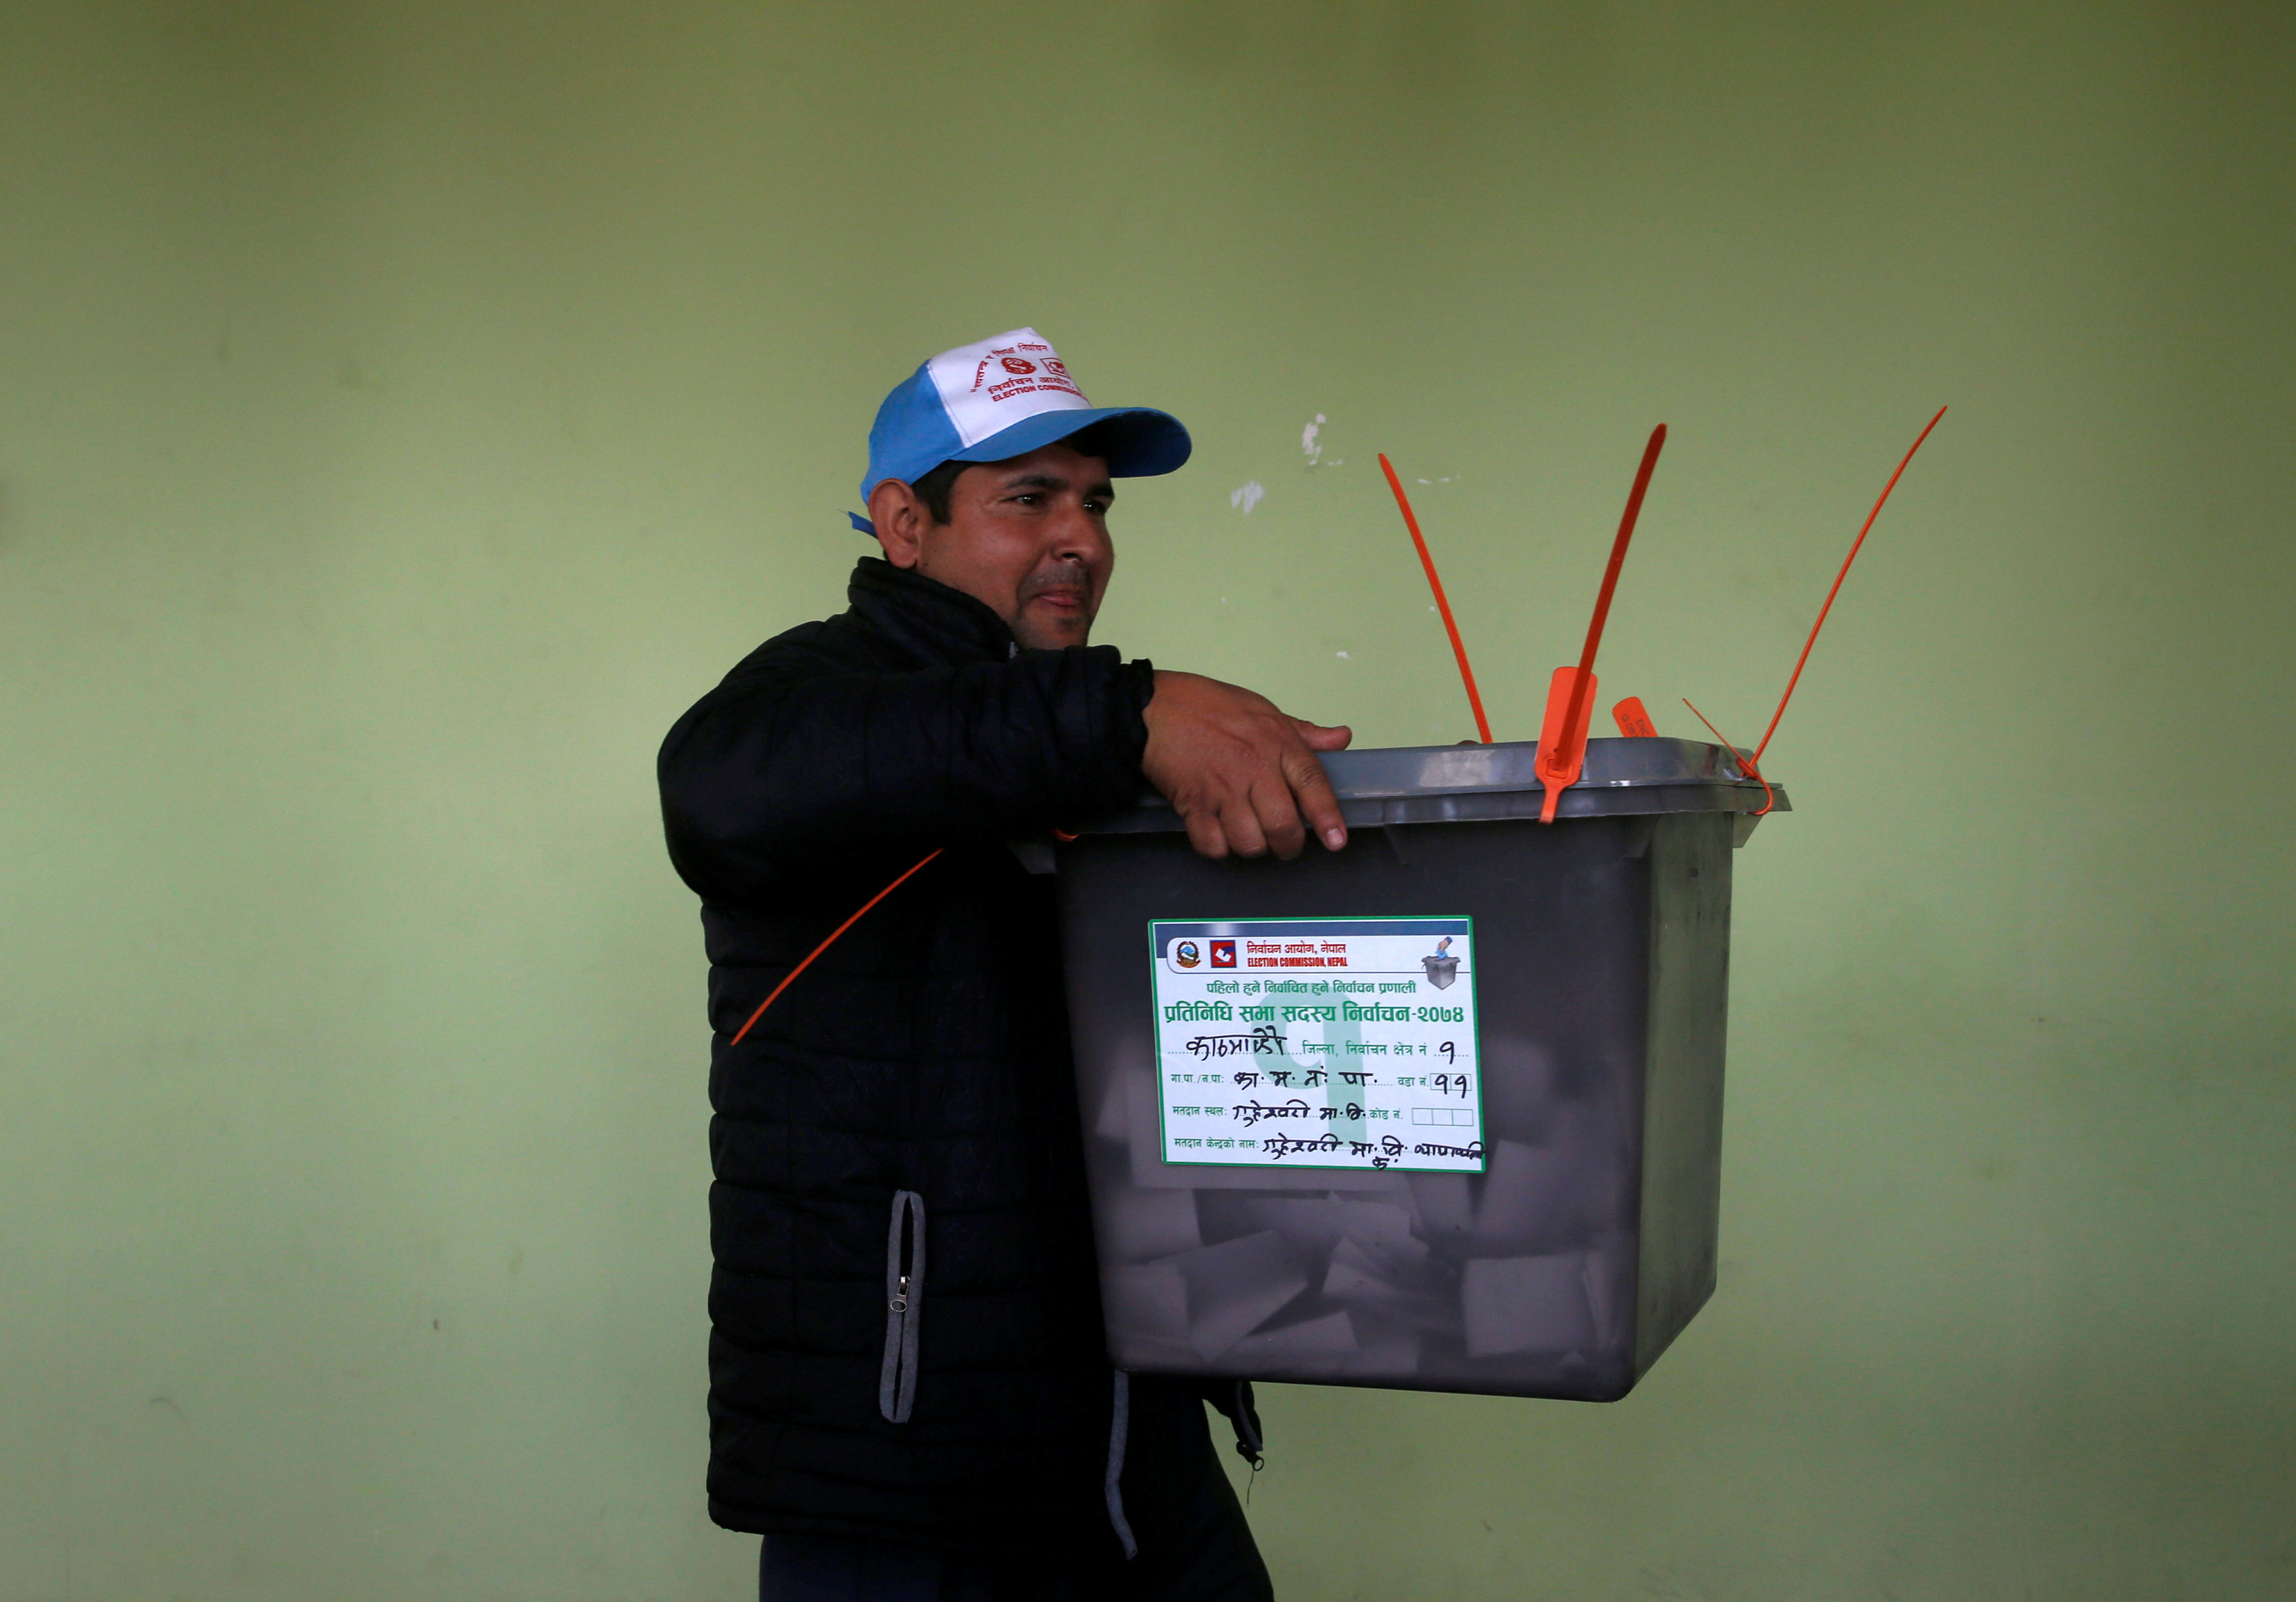 Fugitive wanted in attack wins seat in Nepal parliament